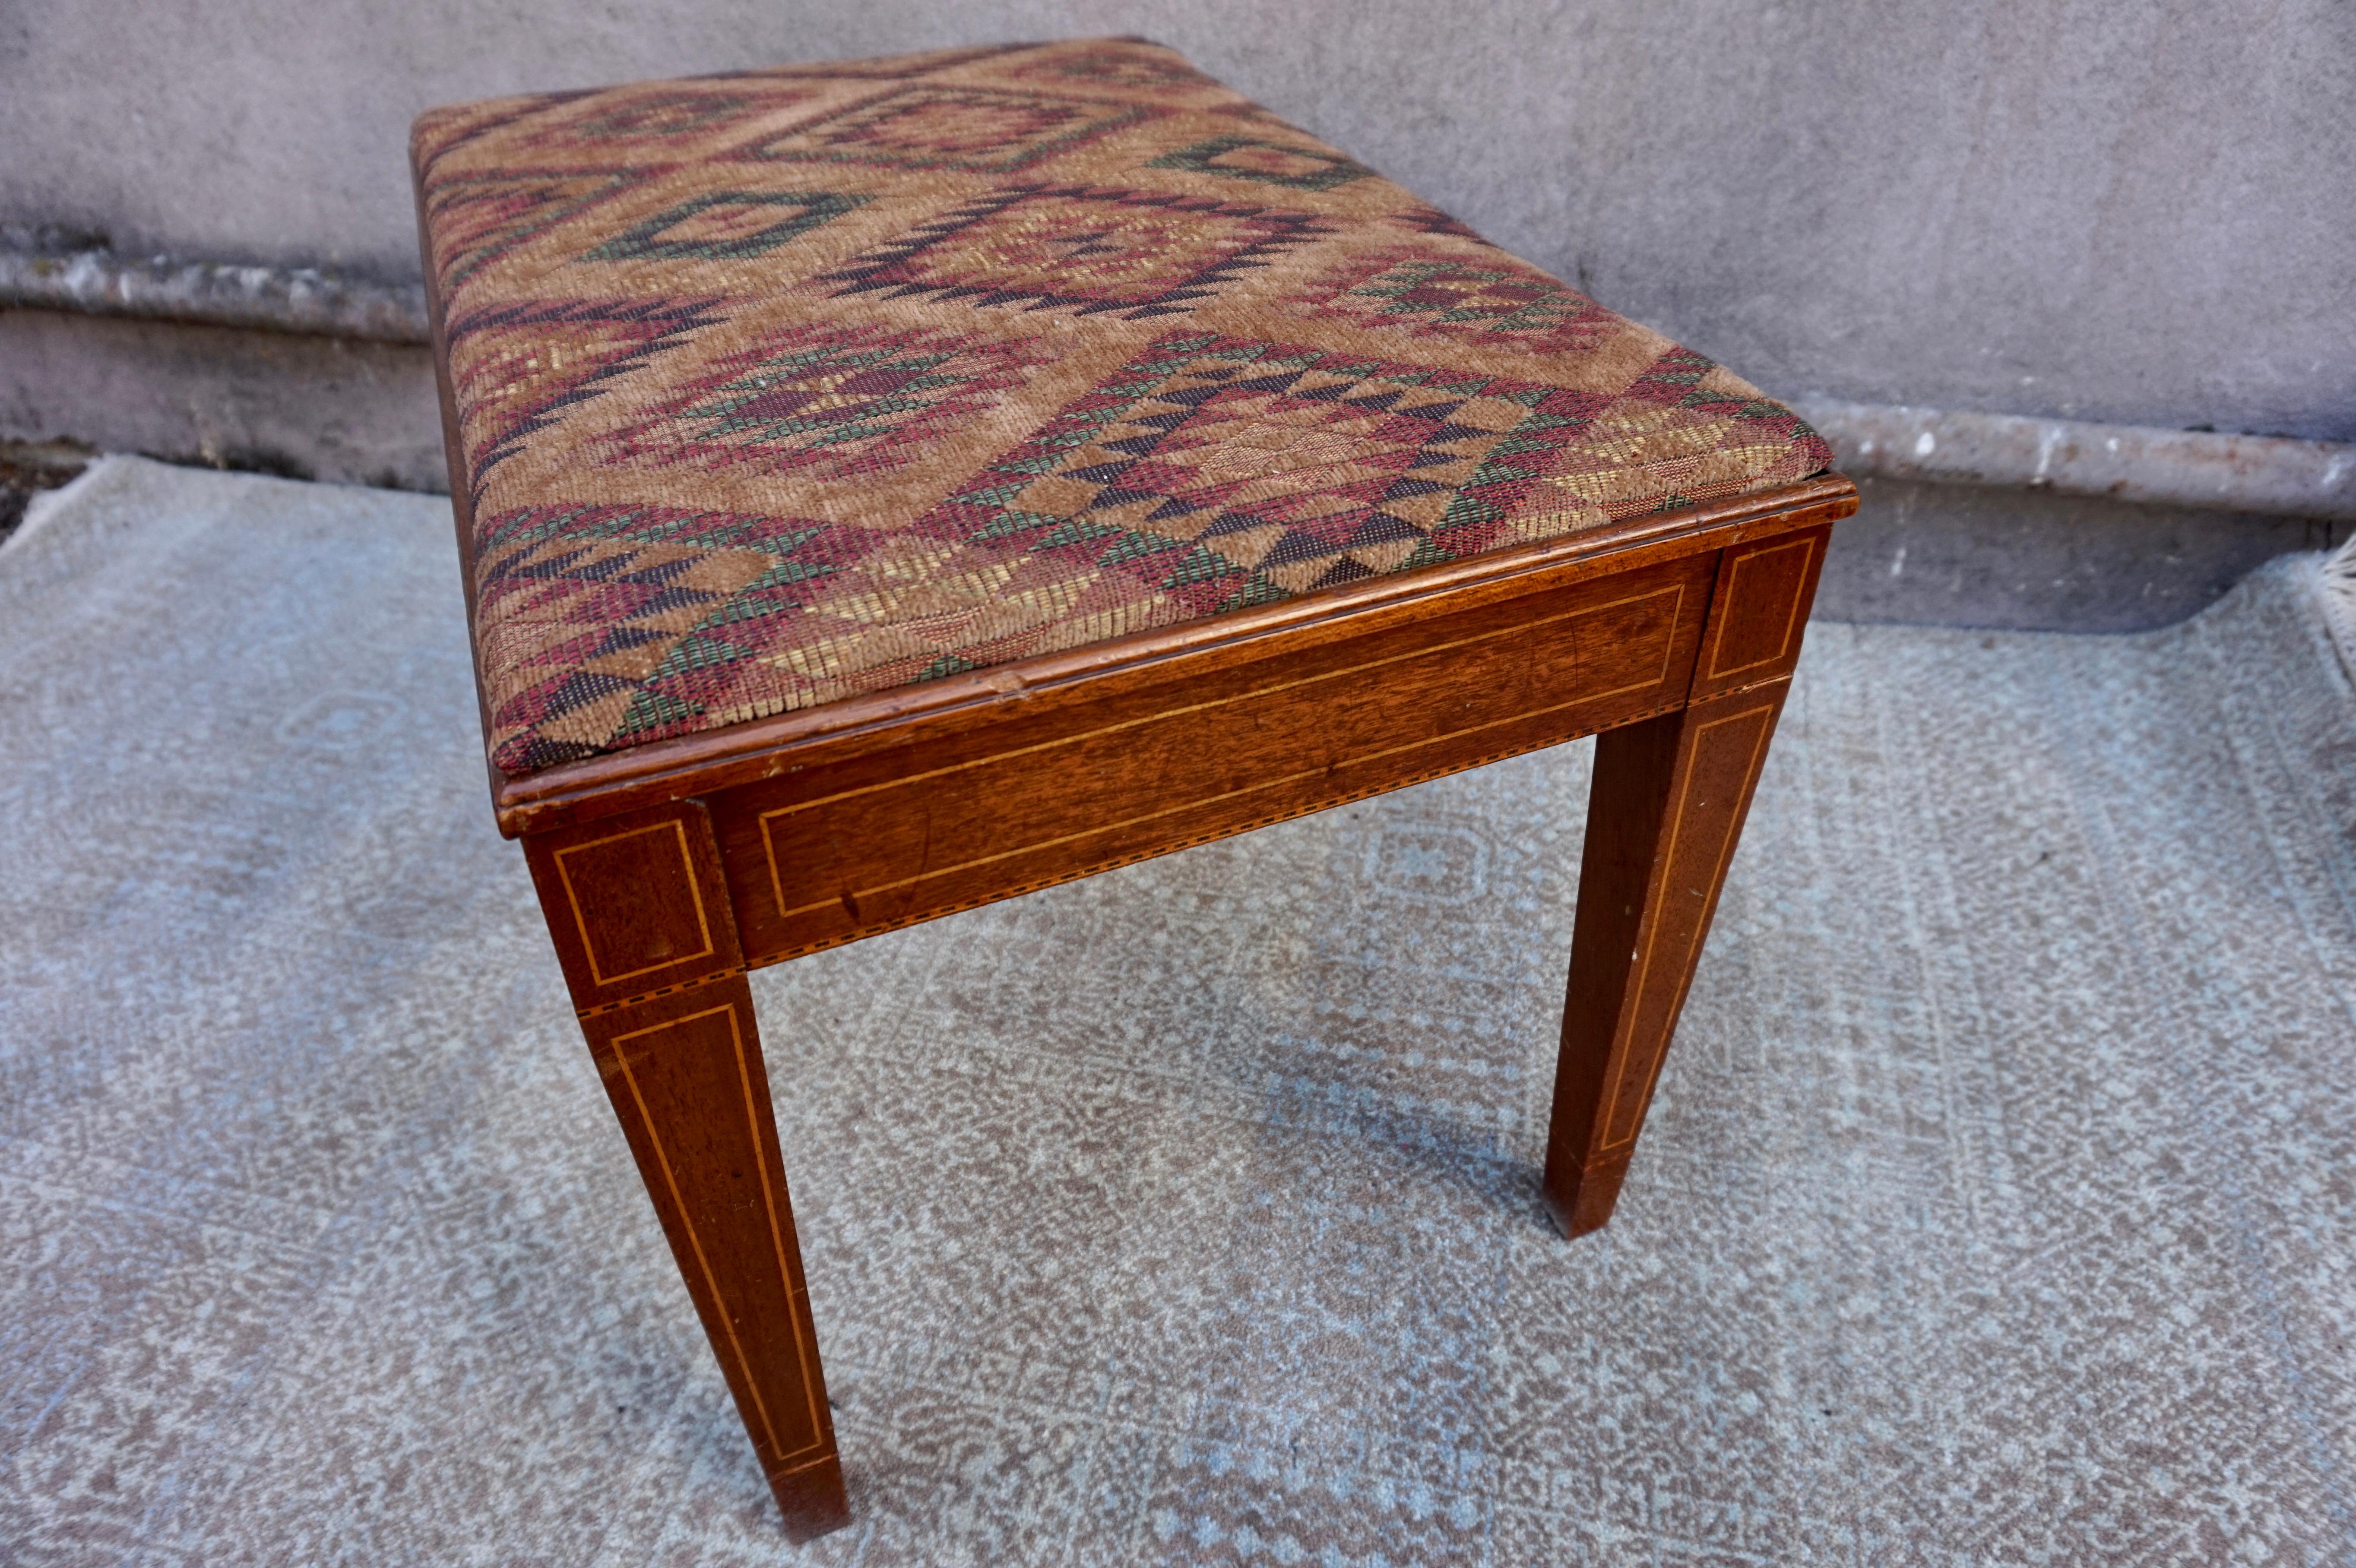 Edwardian Solid Small Foyer Bench With Satinwood Inlay & Chenille Fabric Seat In Good Condition For Sale In Vancouver, British Columbia